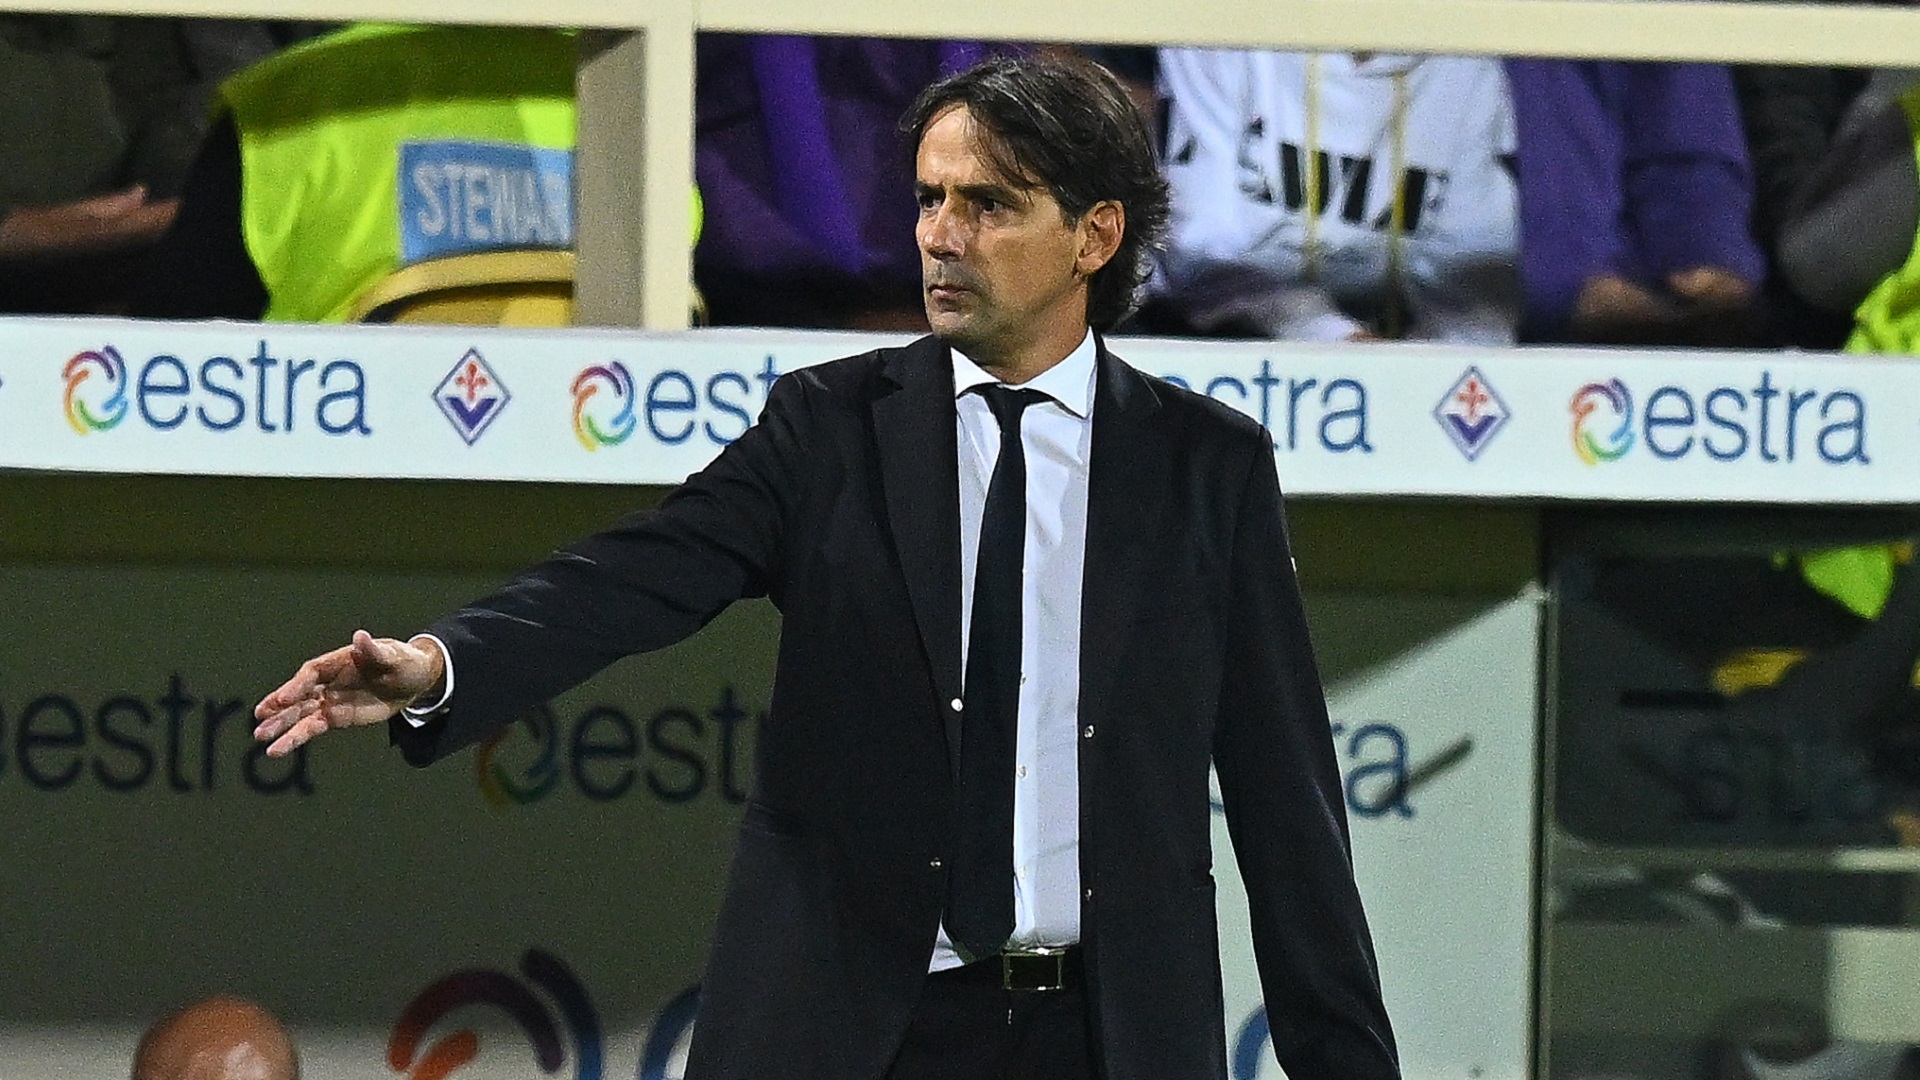 Inter are off to a splendid start and took advantage of the first international break to announce the awaited contract extension of Simone Inzaghi.